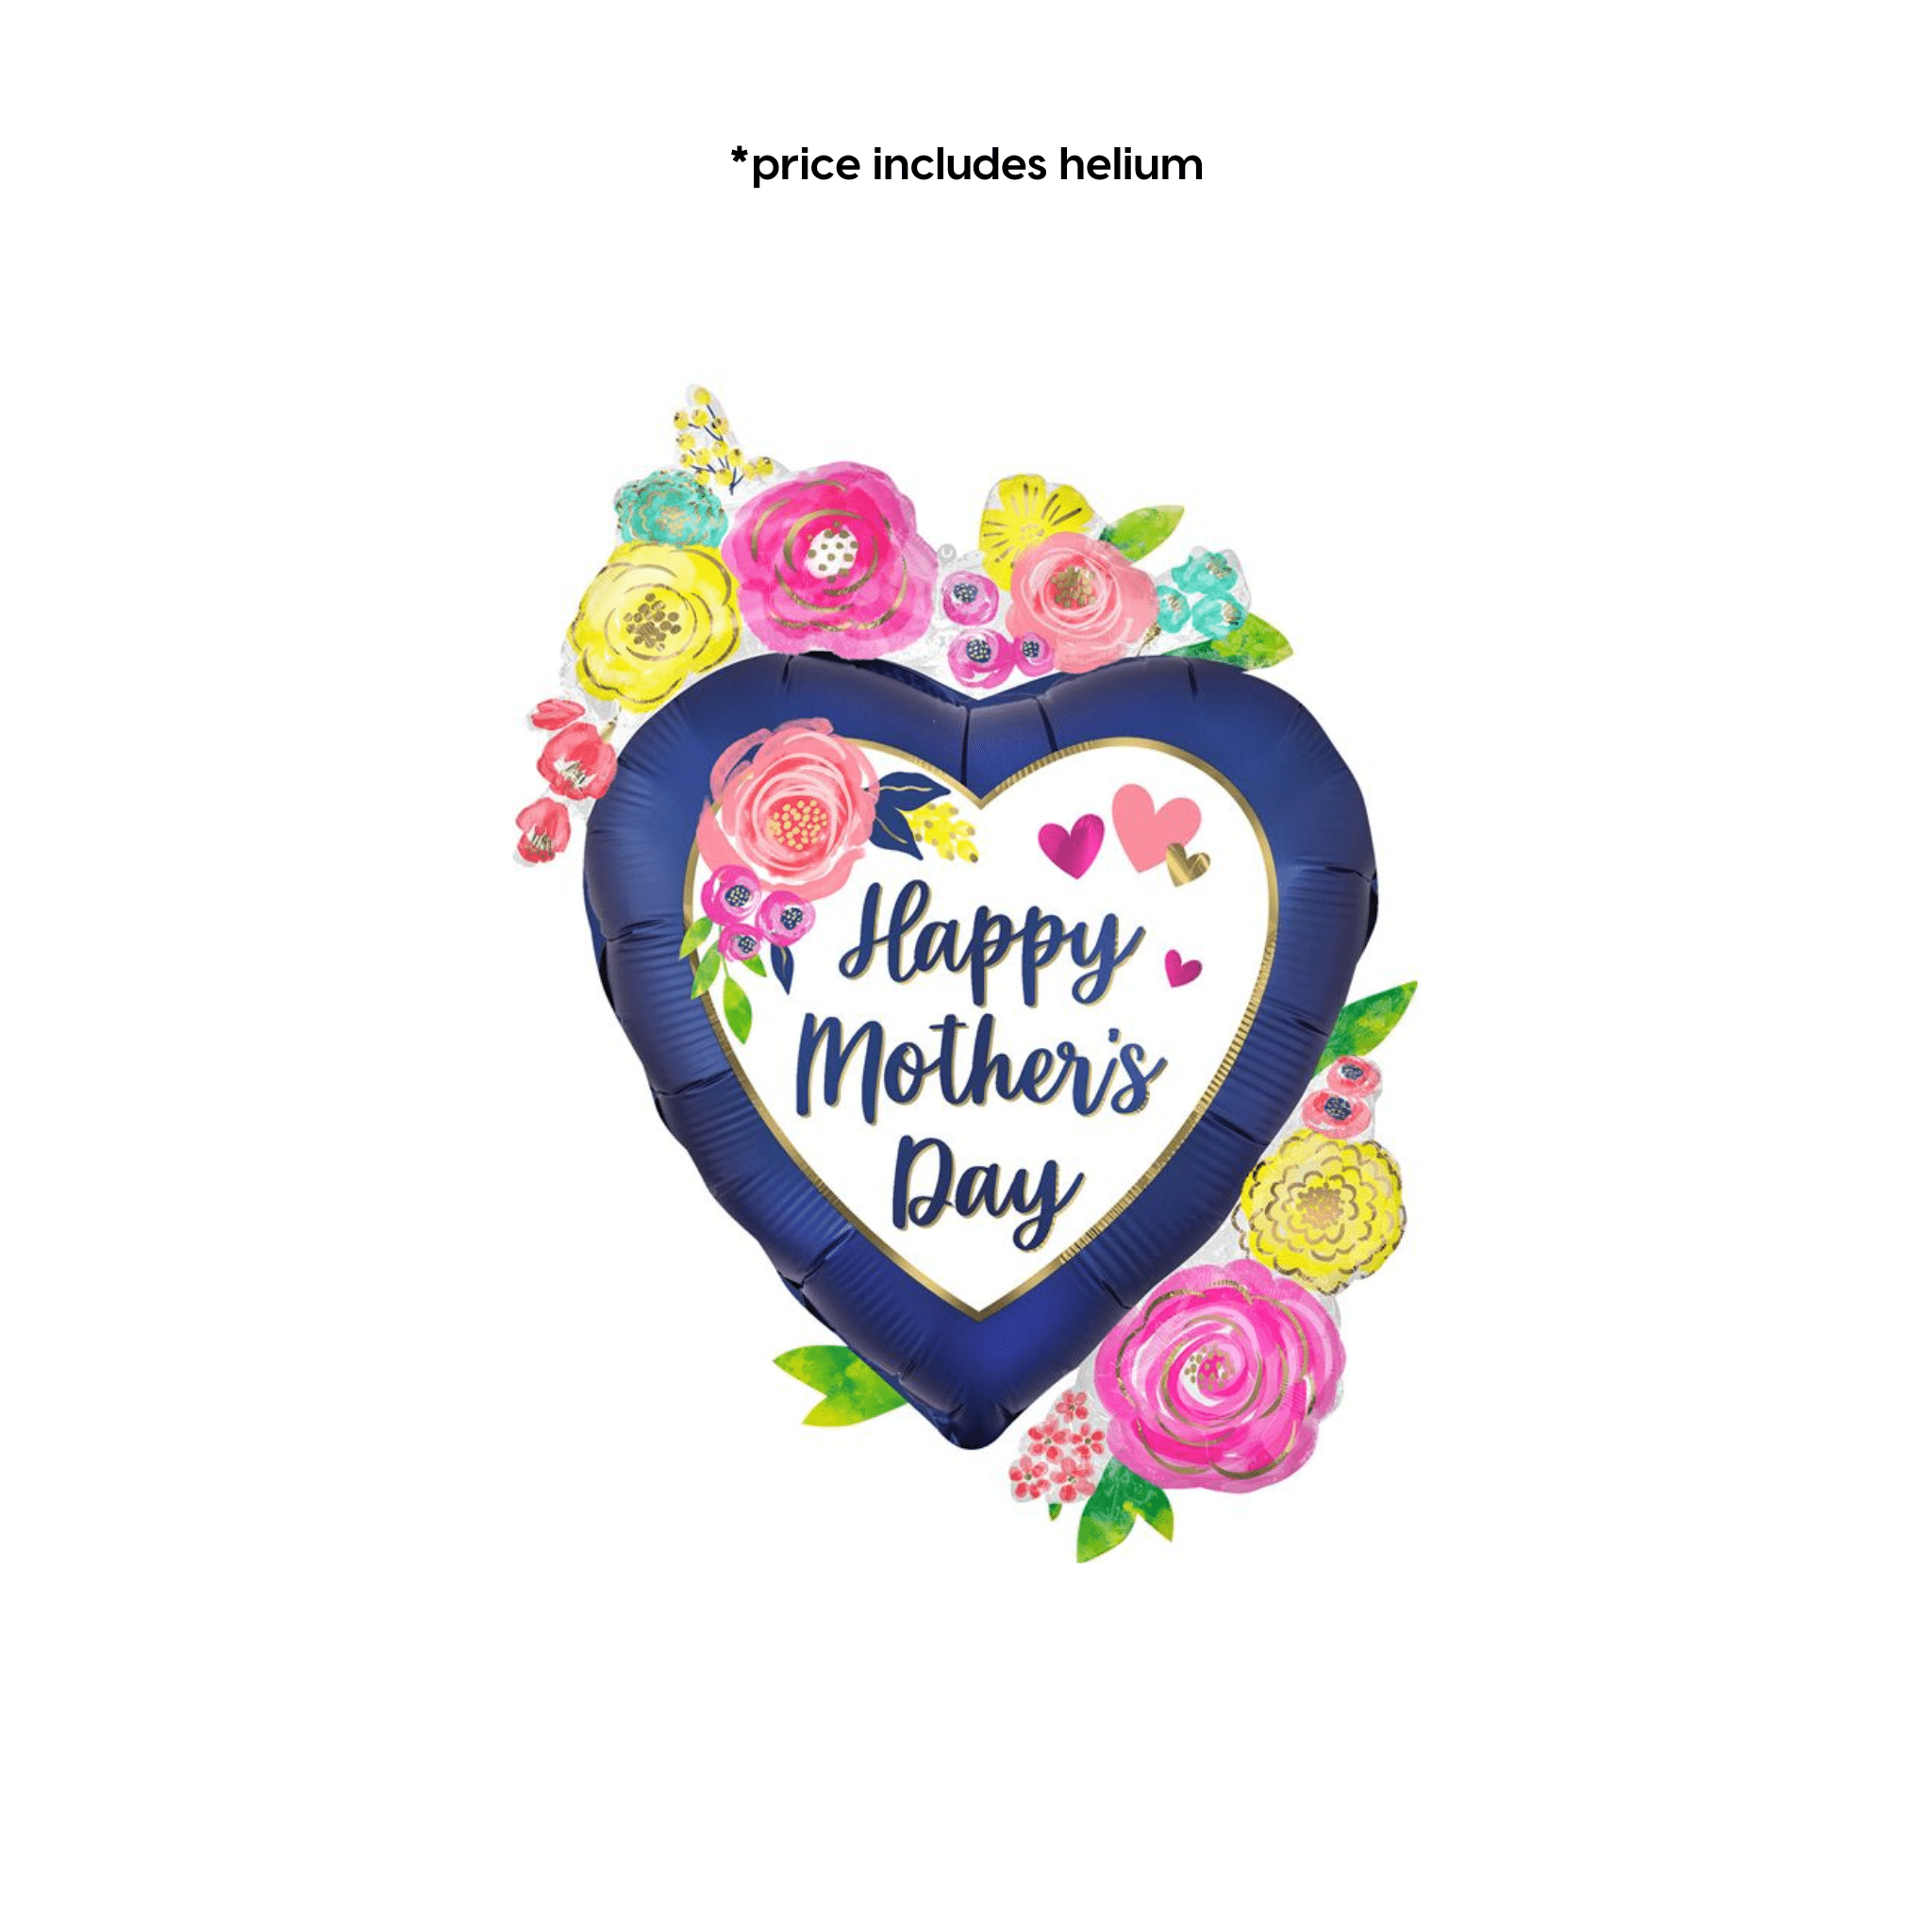 Happy Mothers Day - Jumbo Floral Heart Balloon | The Party Hut